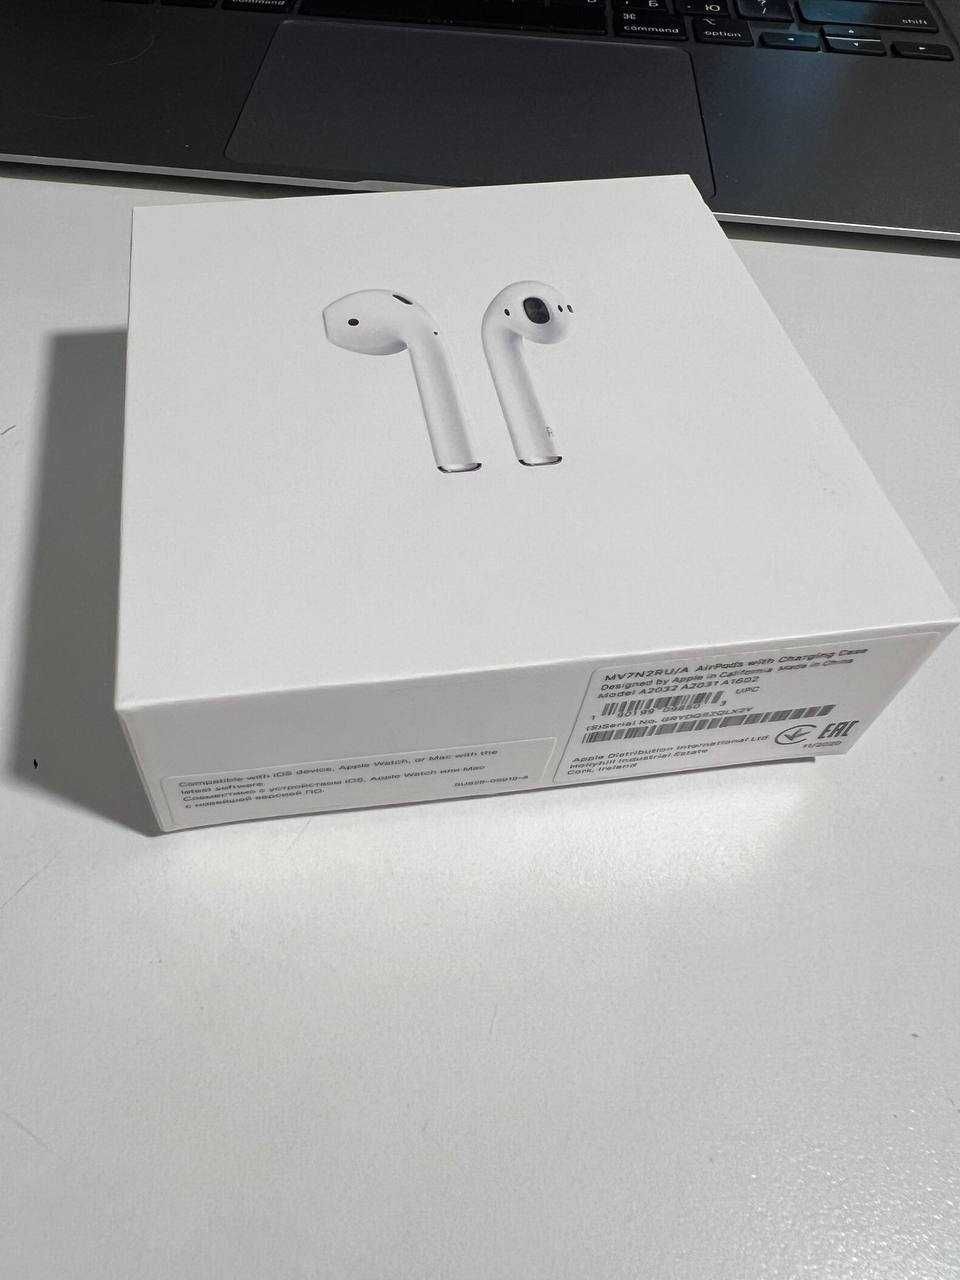 Навушники TWS Apple AirPods 2nd generation with Charging Case (MV7N2)